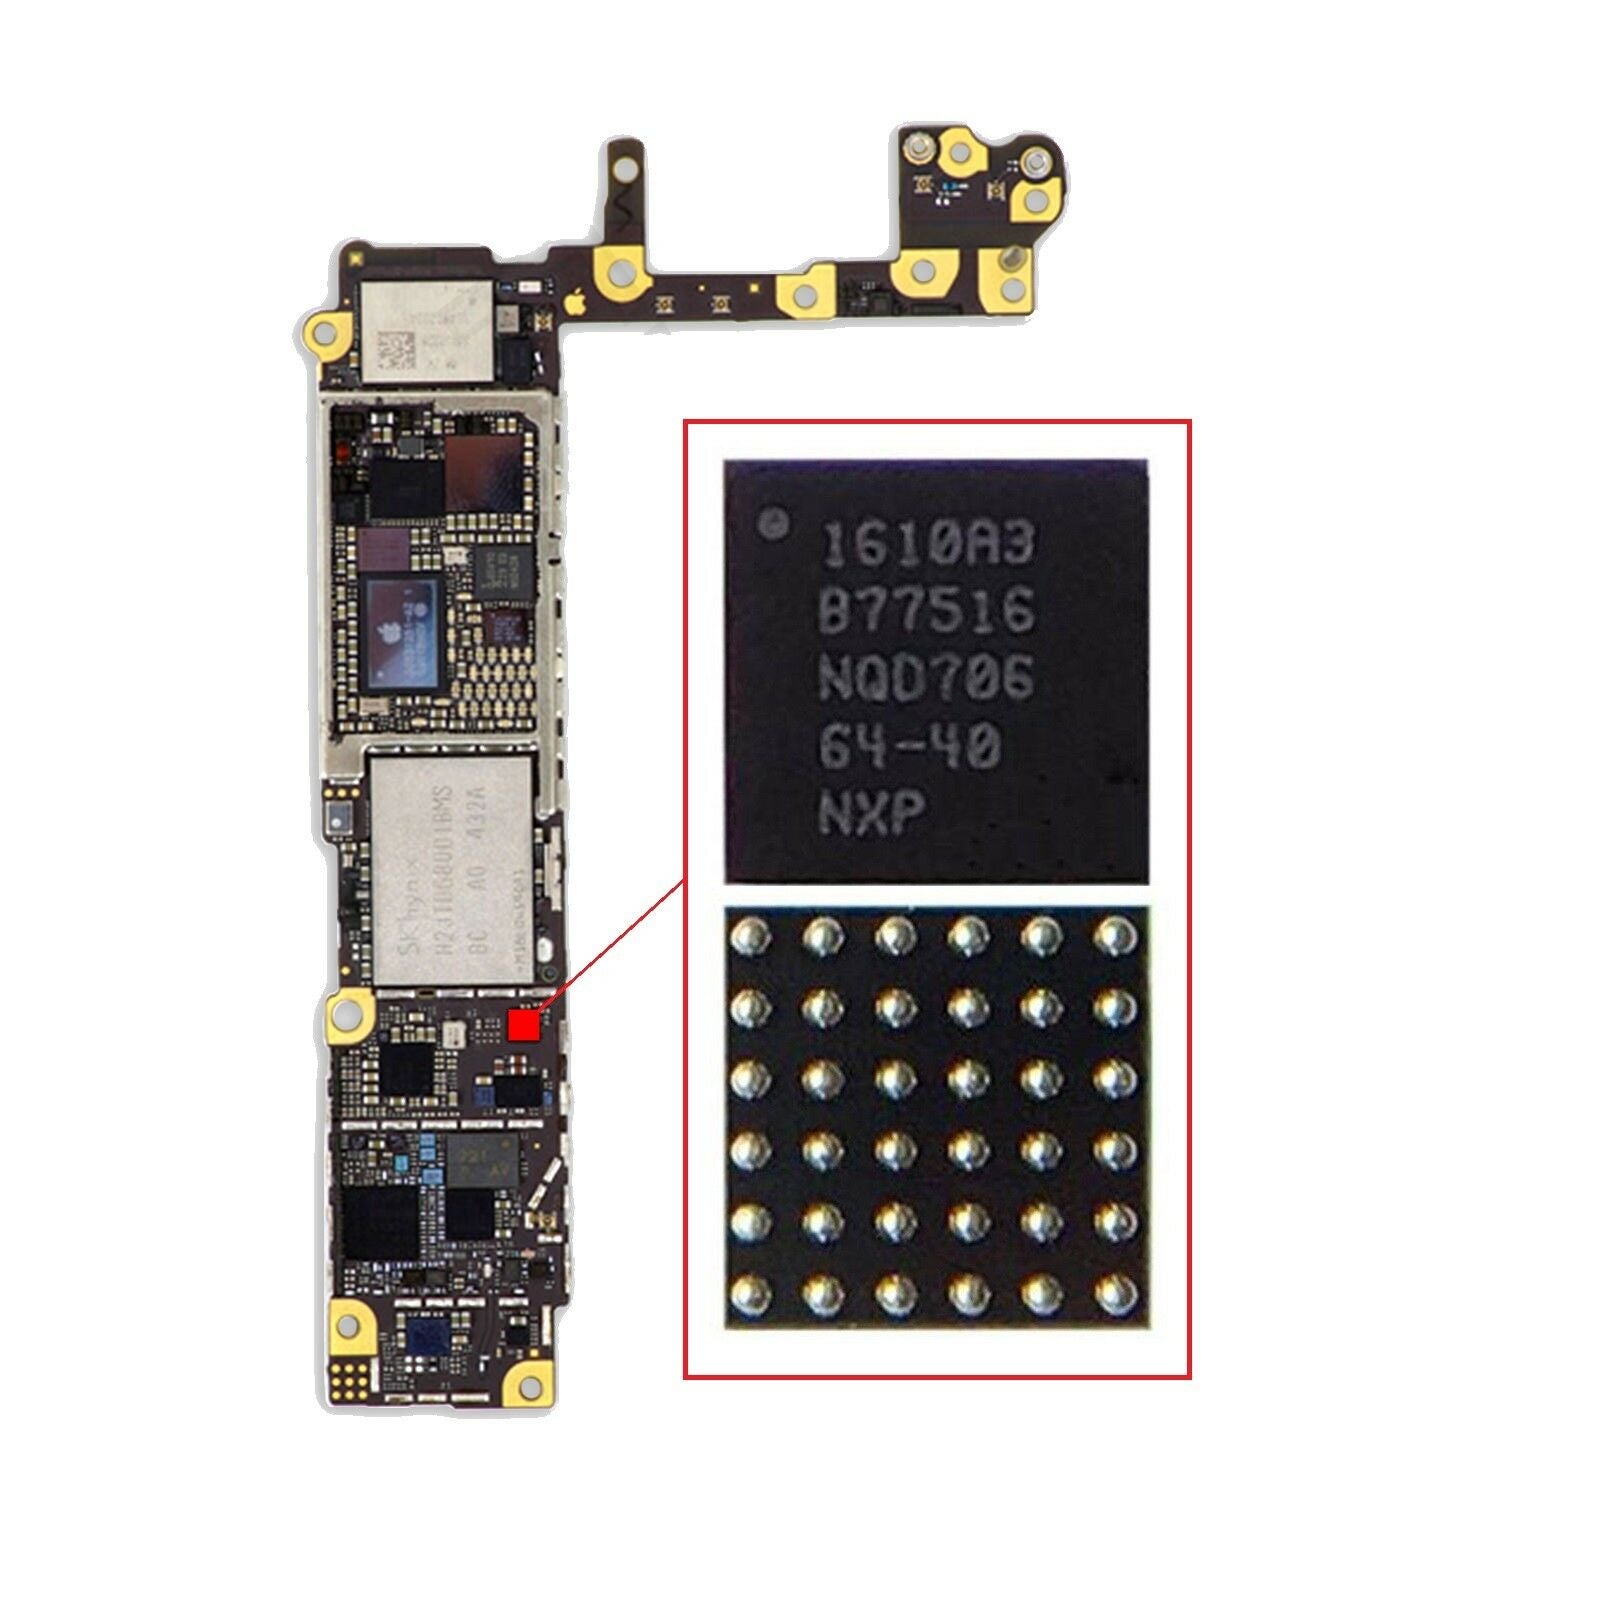 Apple iPhone SE / 6 / 6 Plus / 6S / 6s Plus U2 Power Charging Power IC Tristar Chip 1610A3 for [product_price] - First Help Tech